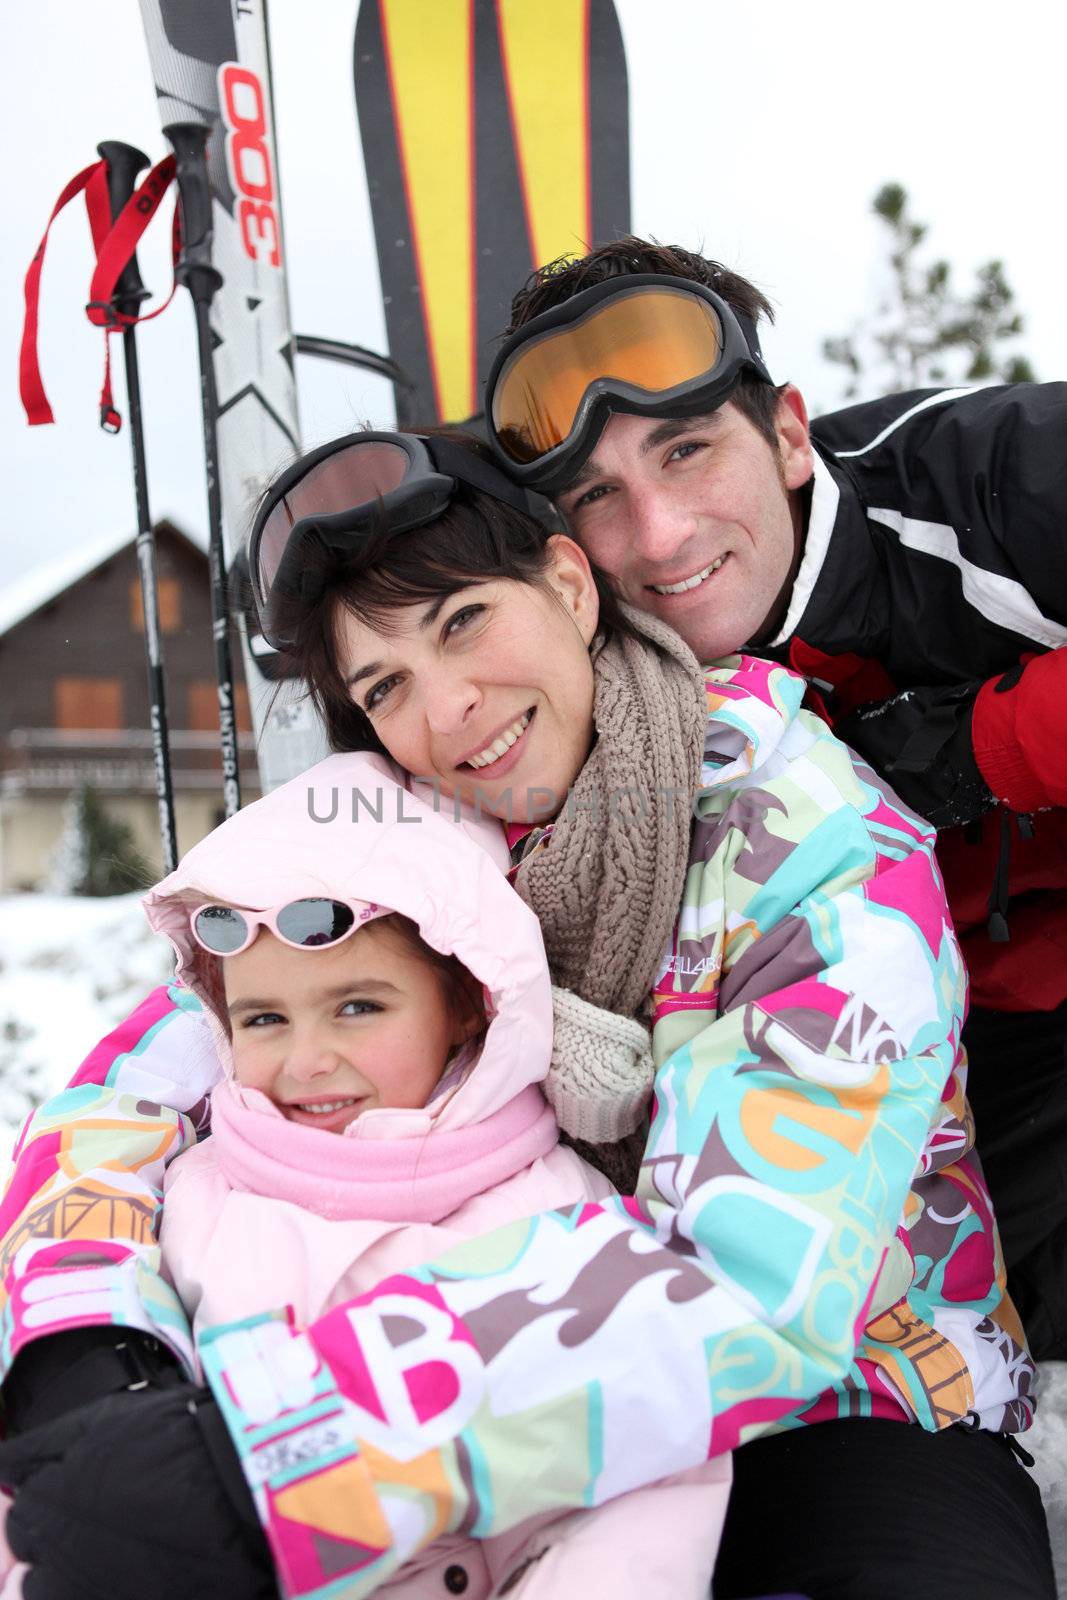 Young family on skiing holiday